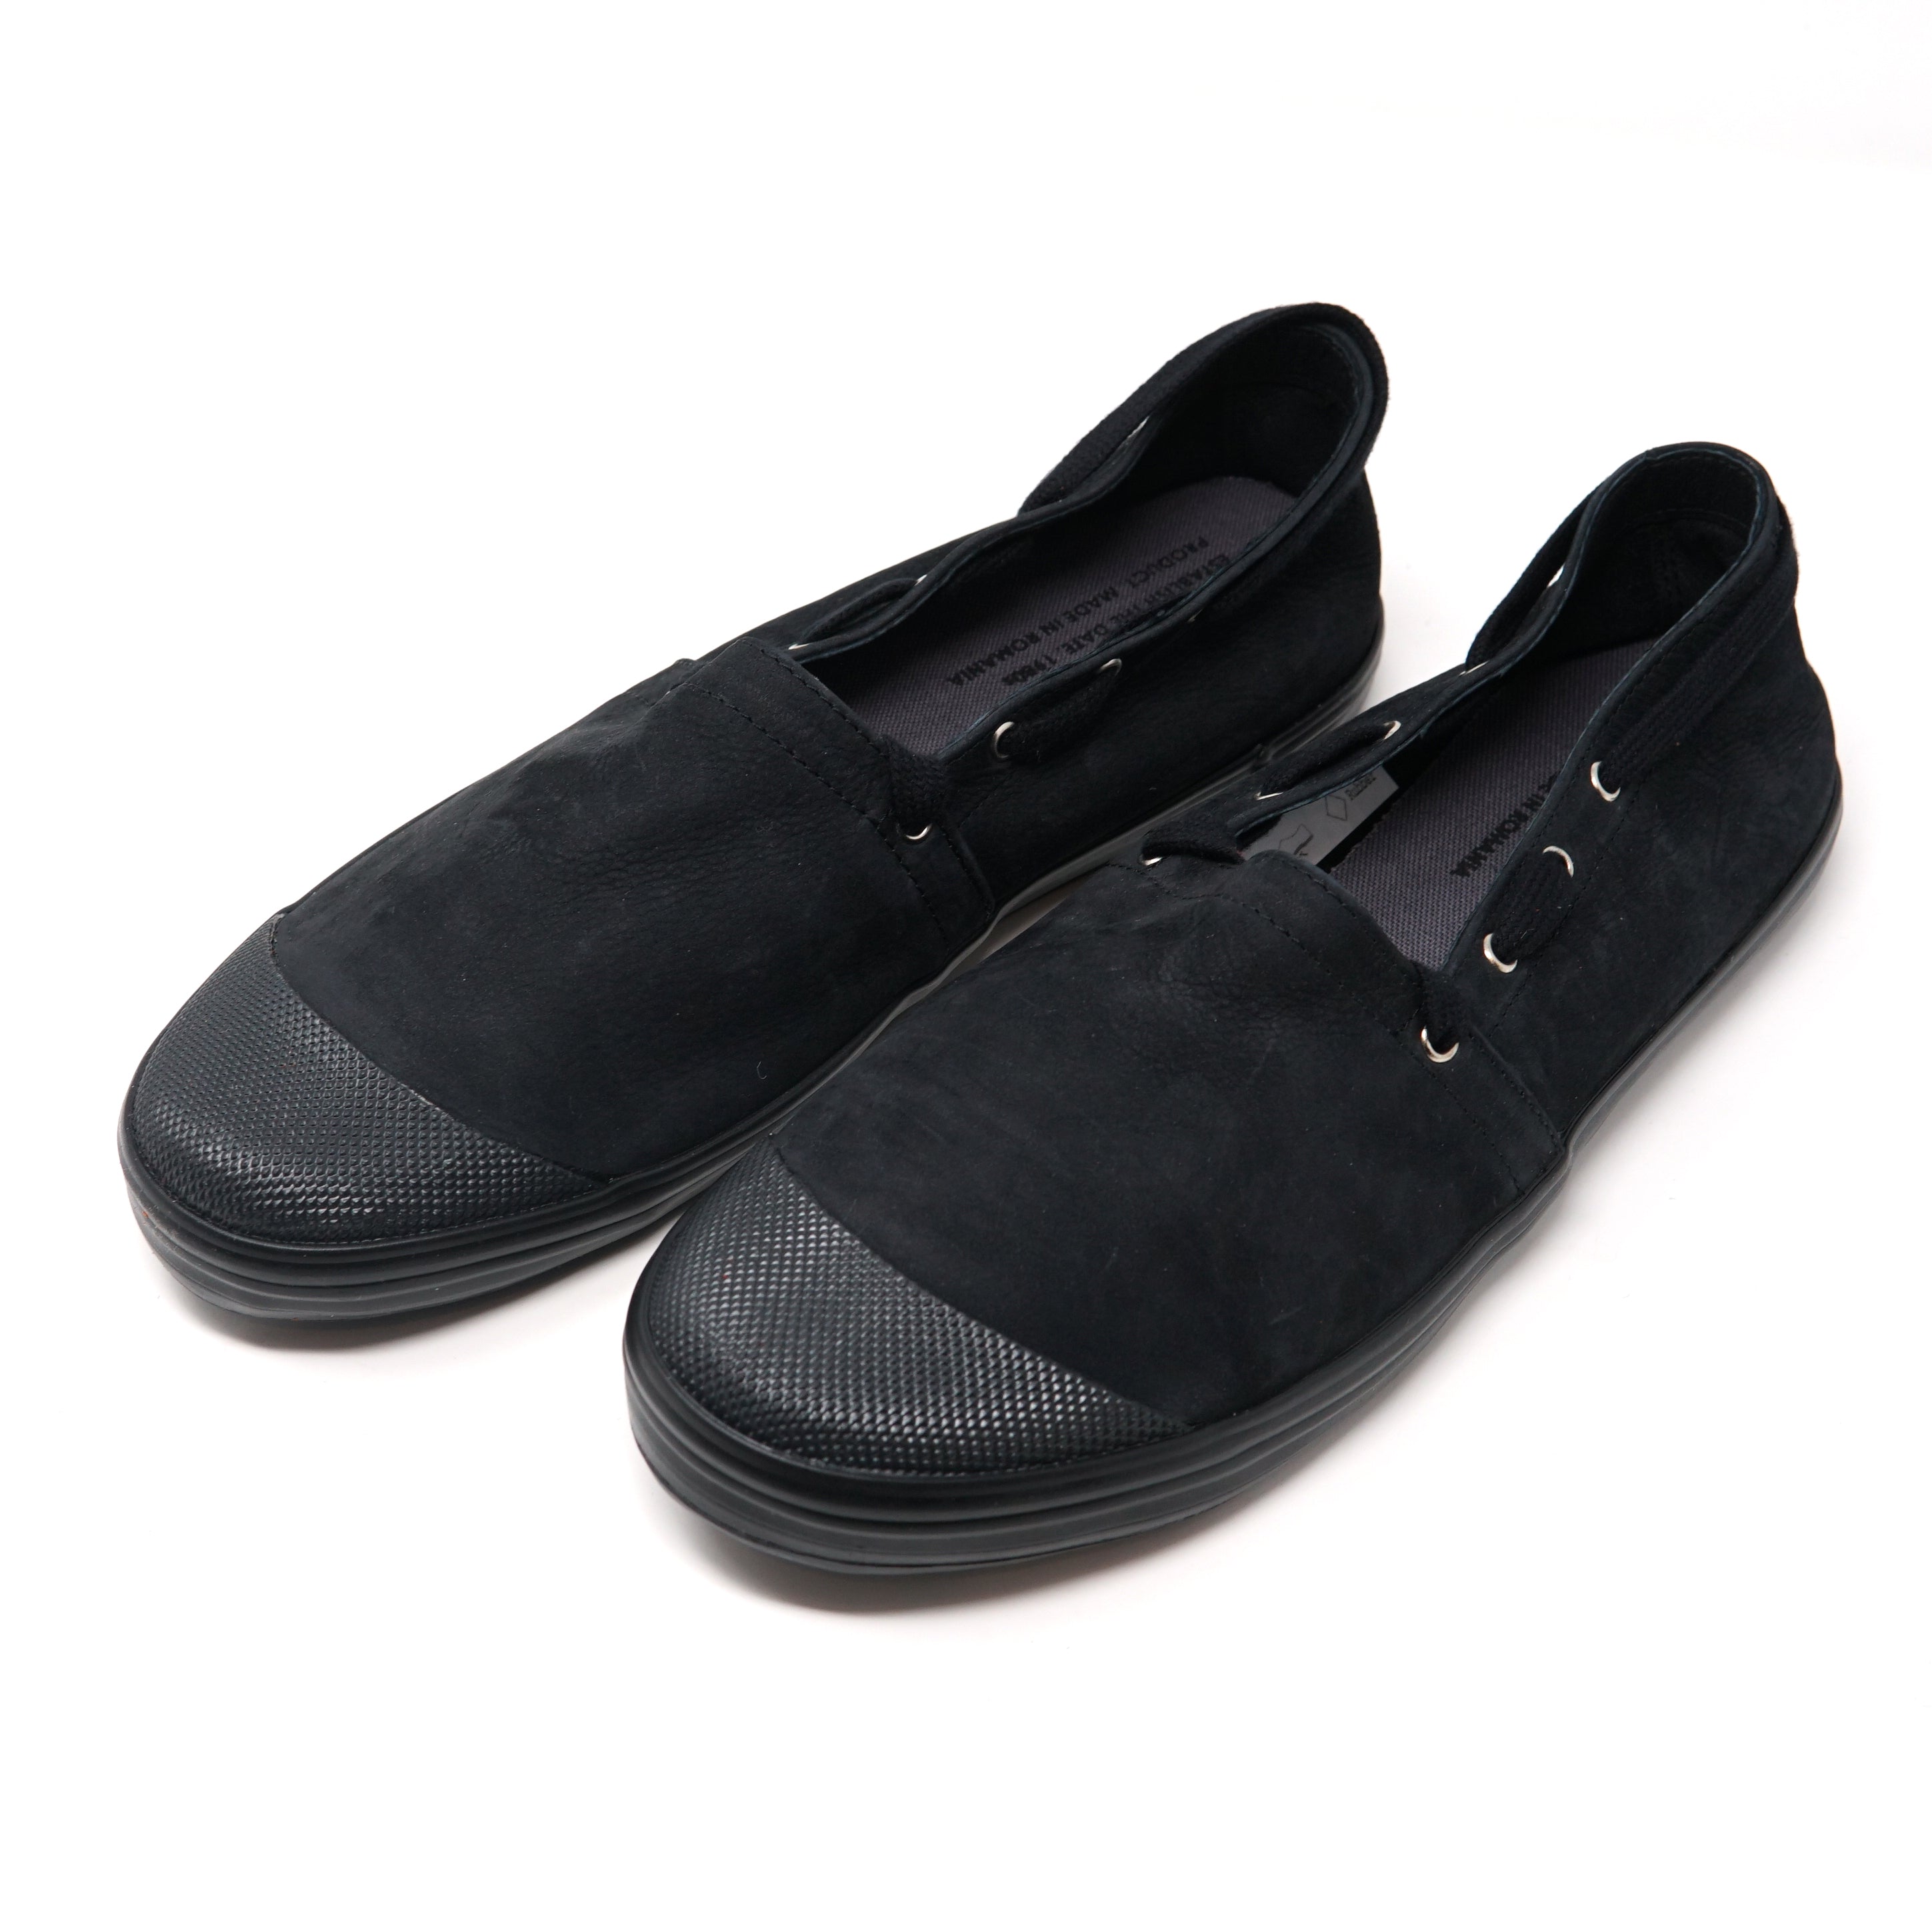 No:4033NL | Name:FRENCH MILITARY ESPADRILLES | Color:Black Nuback【REPRODUCTION OF FOUND】-REPRODUCTION OF FOUND-ADDICTION FUKUOKA